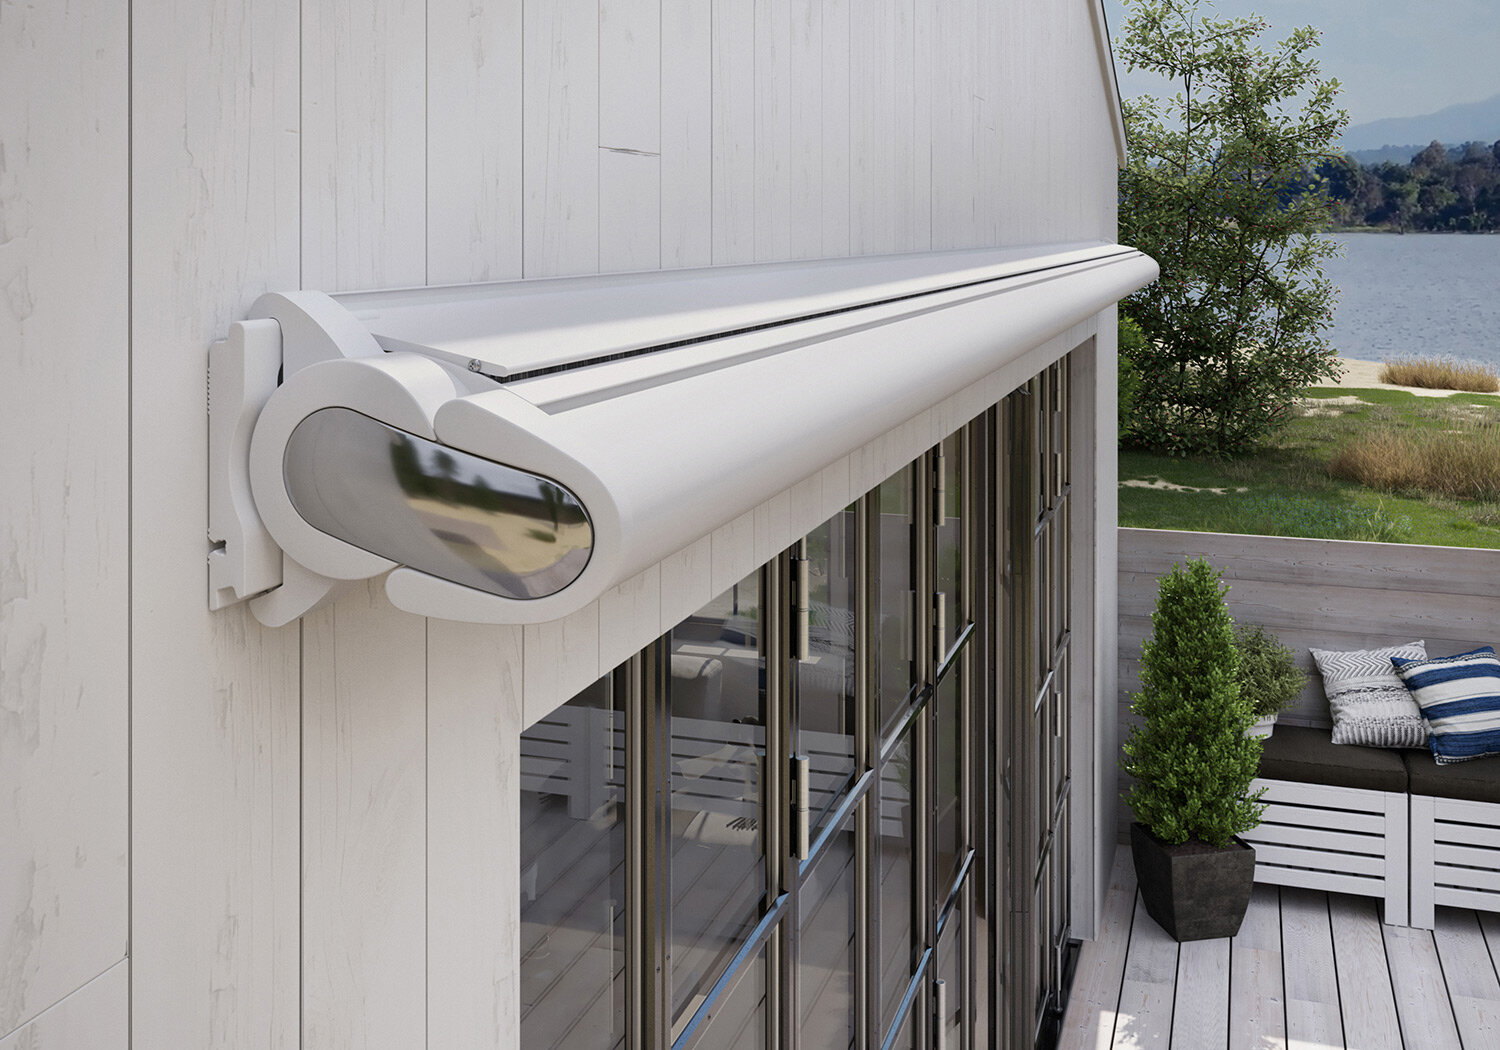 Motorised Awnings Winchester. We provide a wide range of electric awnings at different price points. Sun and wind sensors are also available to automate your awning.